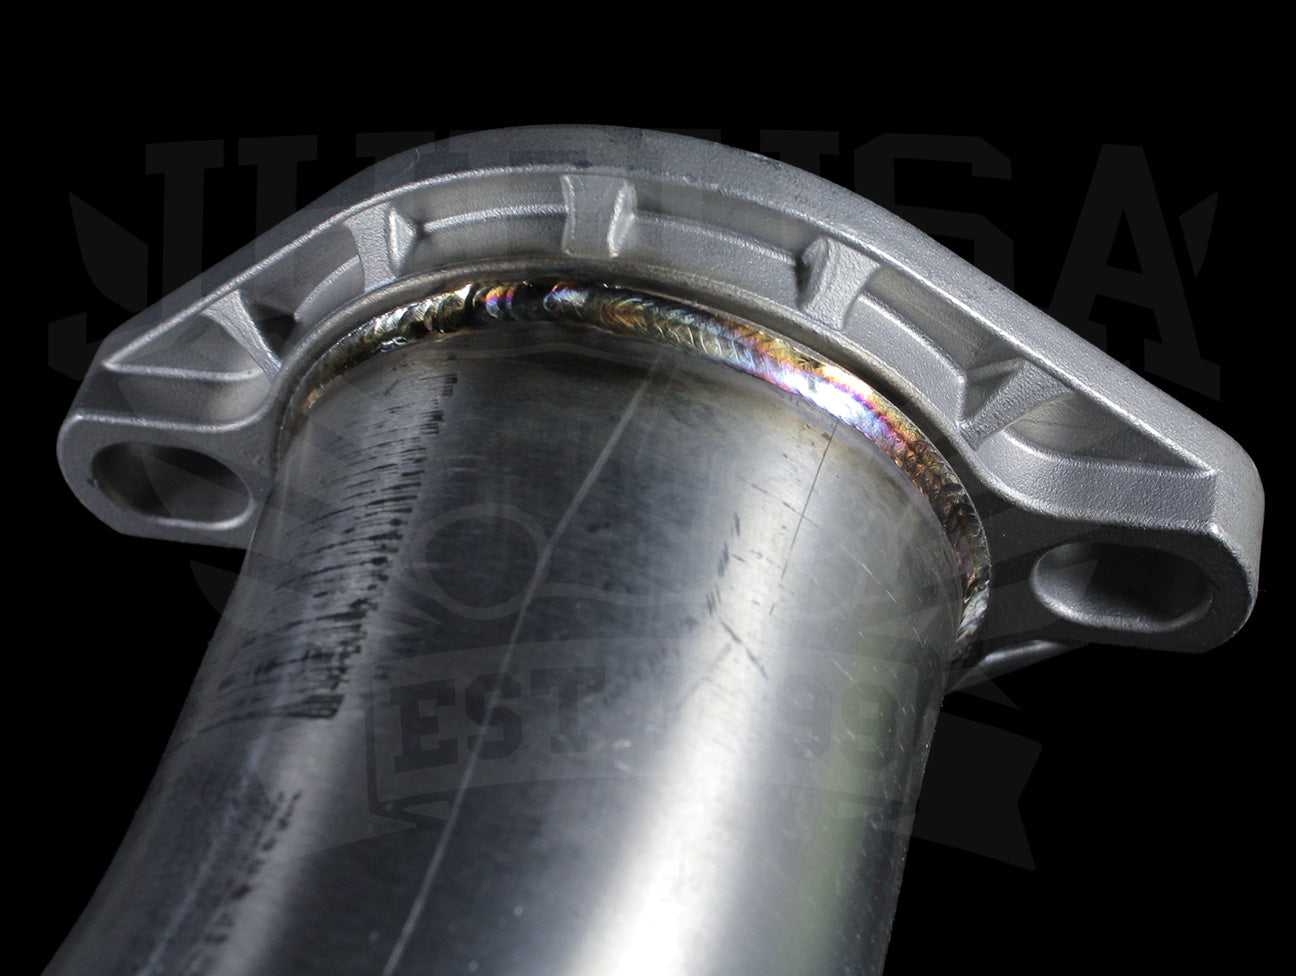 Skunk2 MegaPower RR Exhaust (76mm) - 06-11 Civic Si Coupe